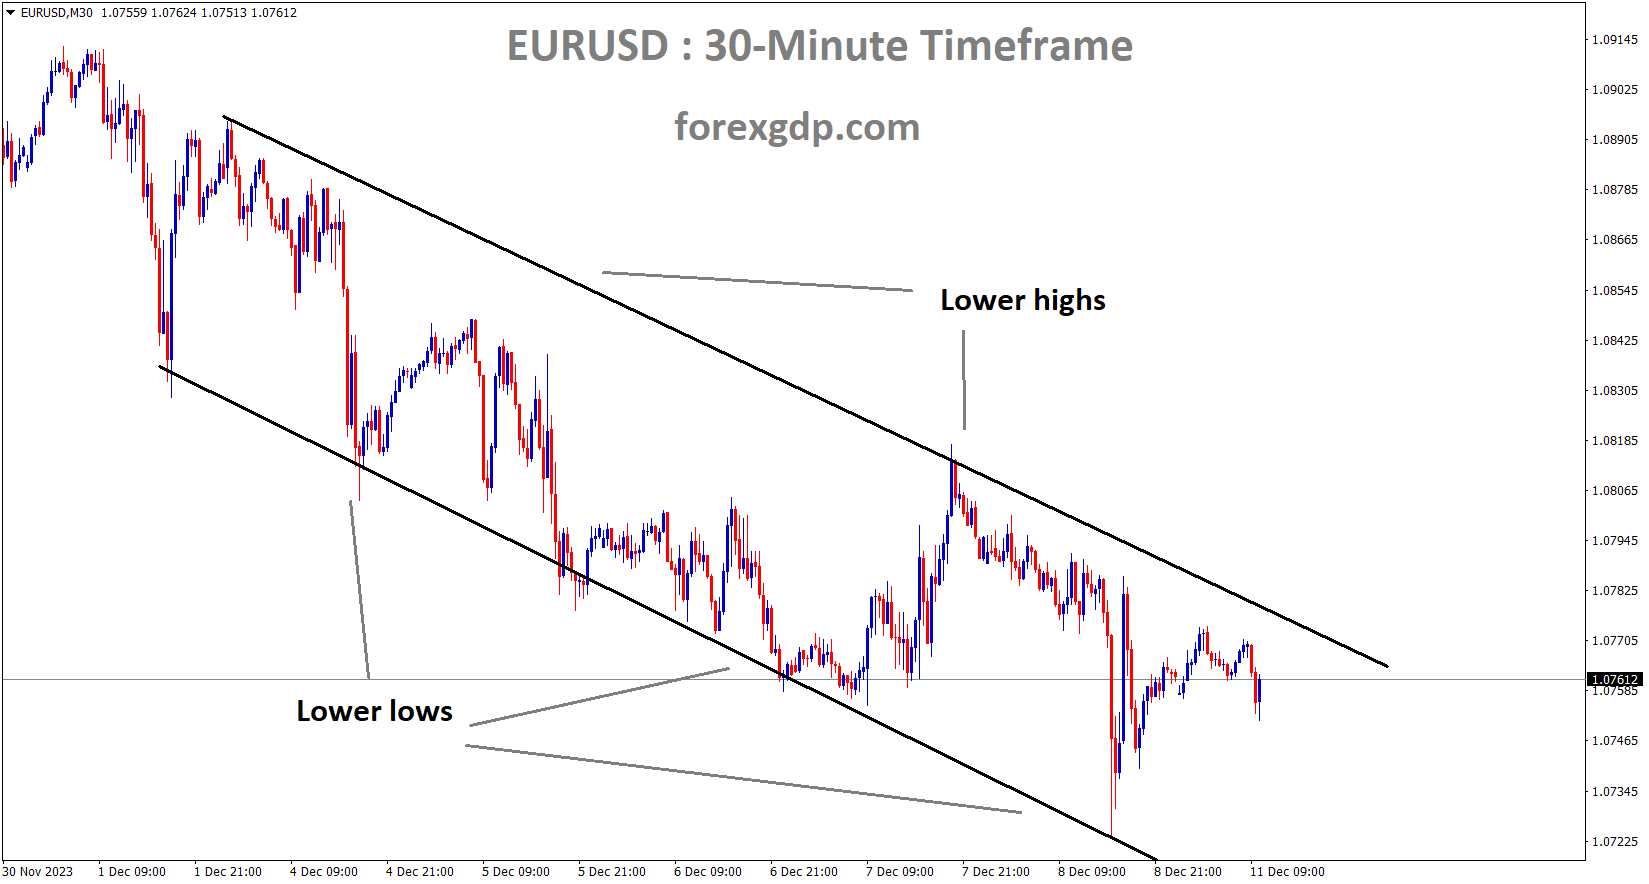 EURUSD is moving in descending channel and the market has reached the lower high area of channel